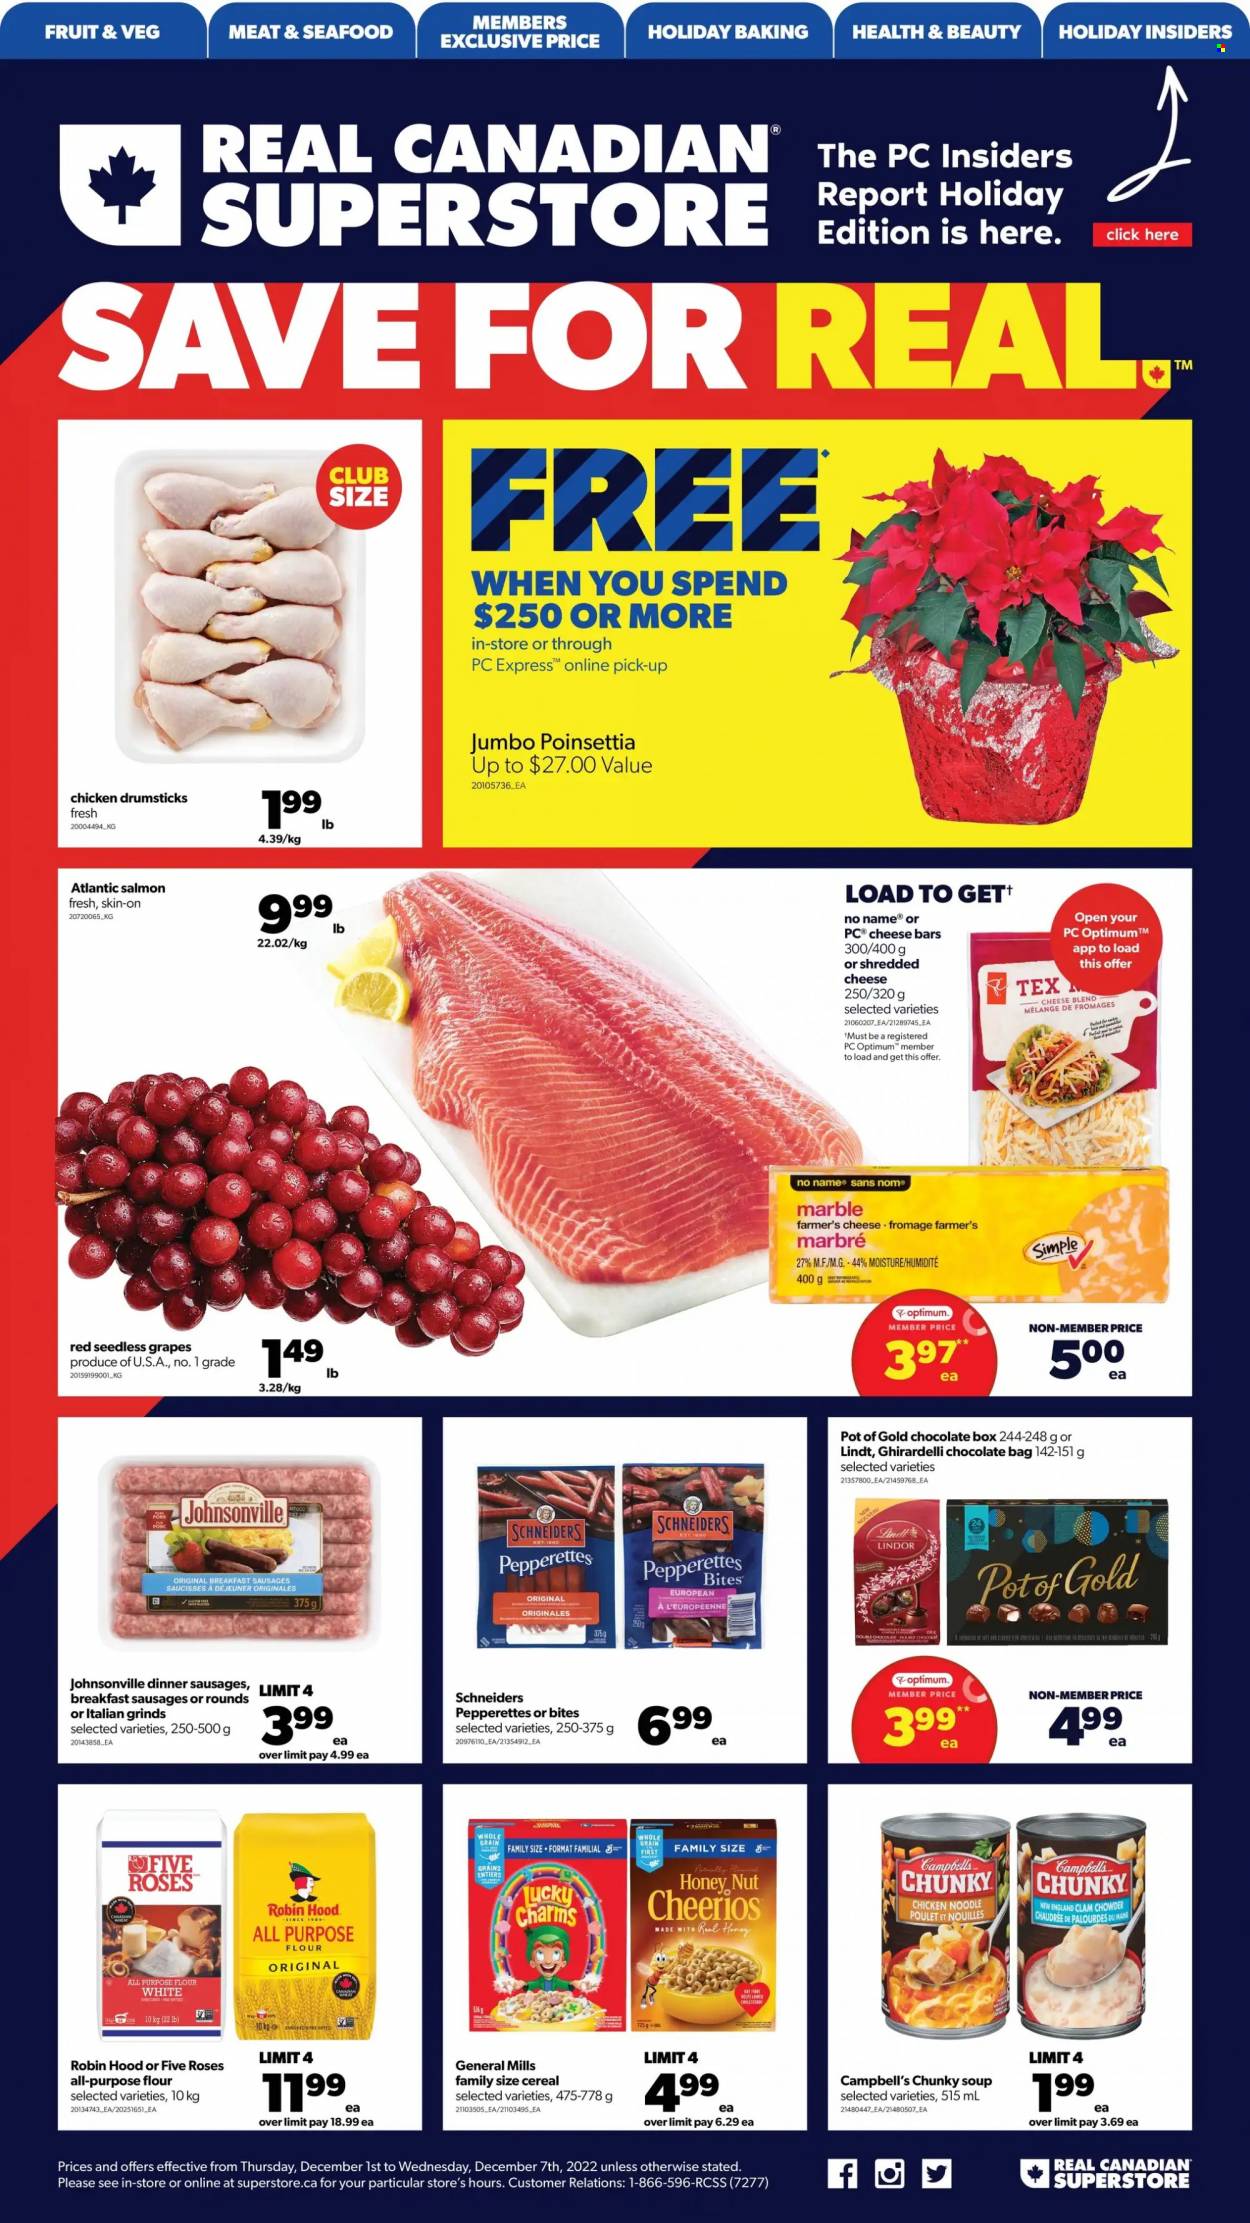 thumbnail - Real Canadian Superstore Flyer - December 01, 2022 - December 07, 2022 - Sales products - grapes, seedless grapes, salmon, seafood, No Name, Campbell's, soup, noodles, Johnsonville, sausage, shredded cheese, chocolate, Ghirardelli, all purpose flour, flour, clam chowder, cereals, Cheerios, chicken drumsticks, chicken, bag, pot, Optimum, poinsettia, Lindt, Lindor. Page 1.